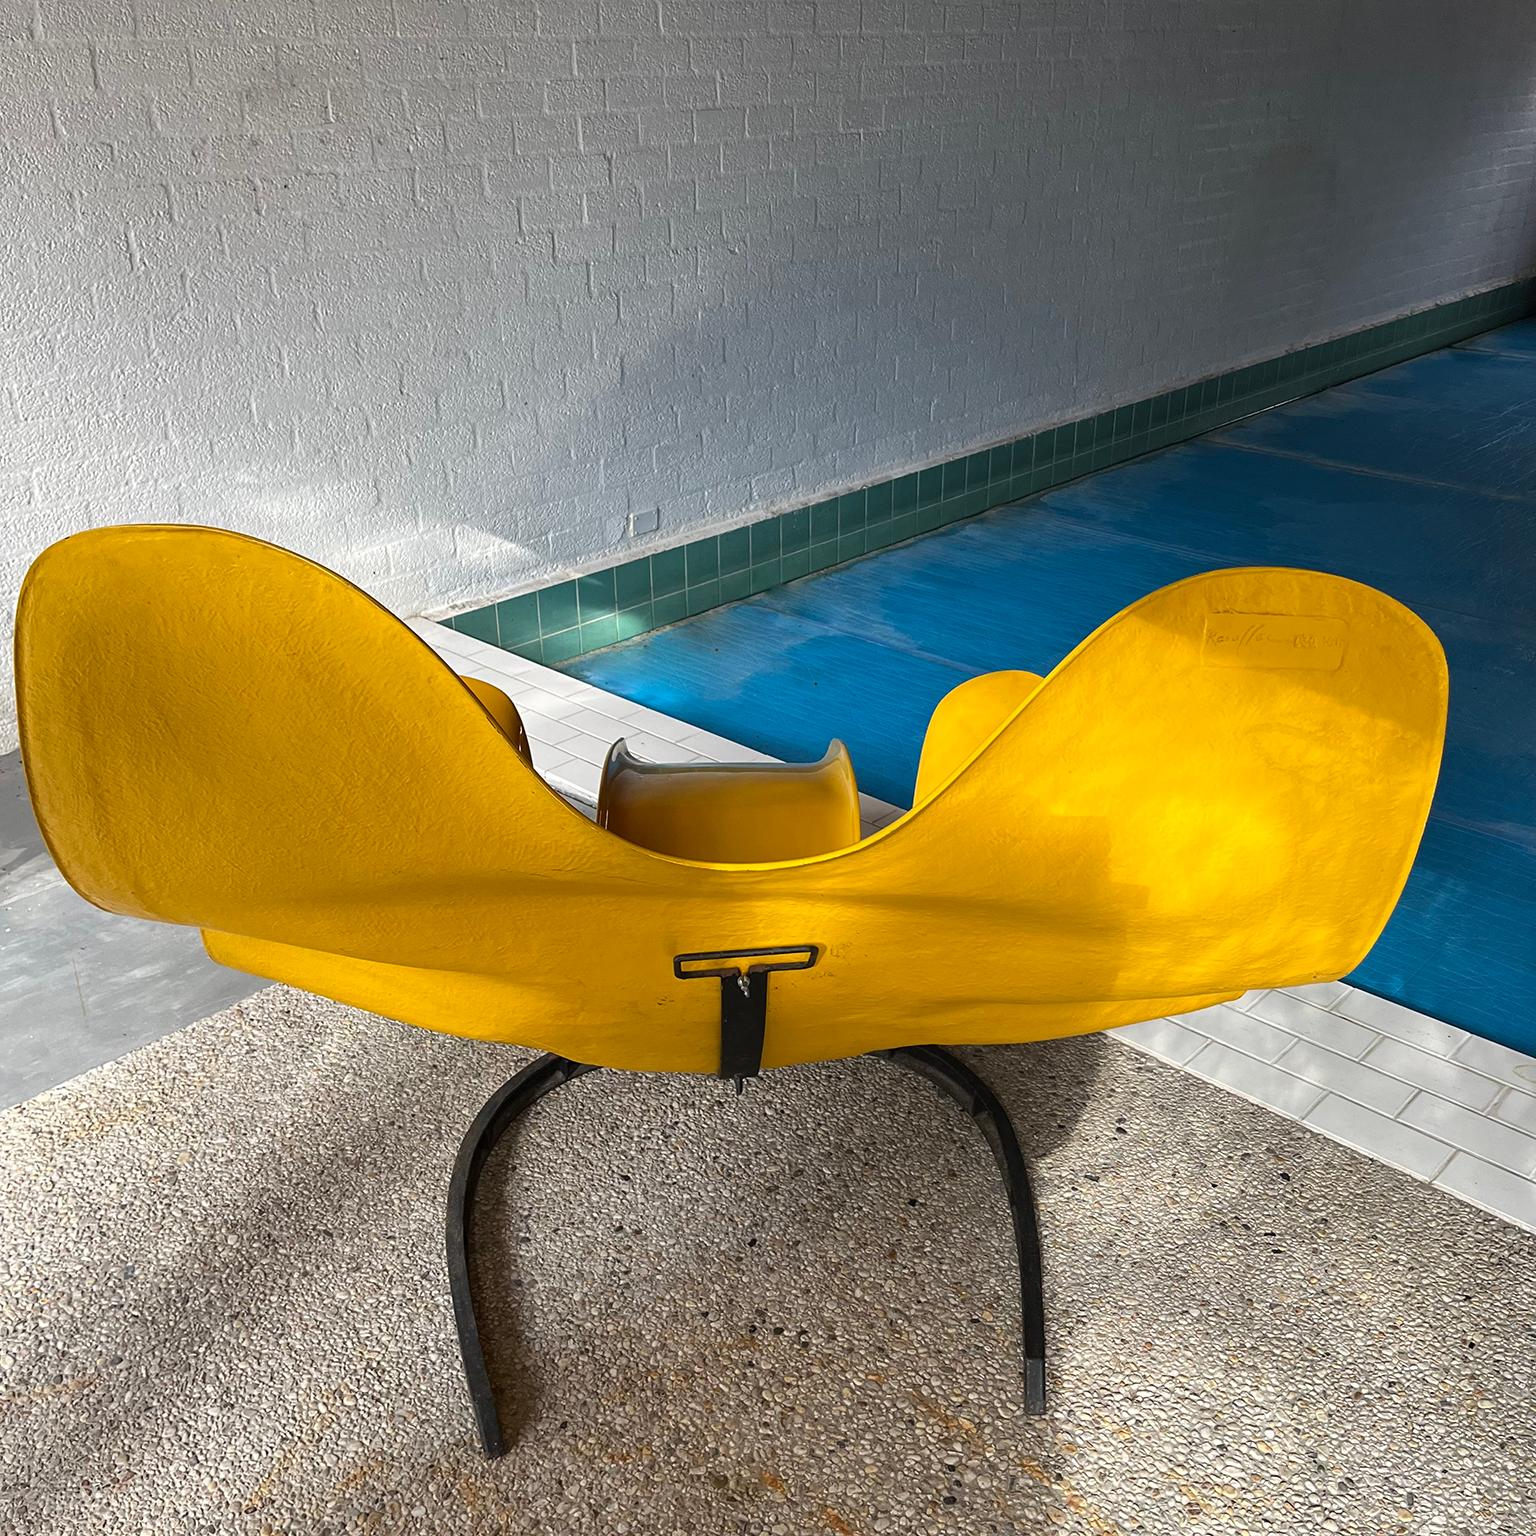 1966, Elephant Chair by Bernard Rancillac Yellow with Black Base Limited Edition For Sale 1